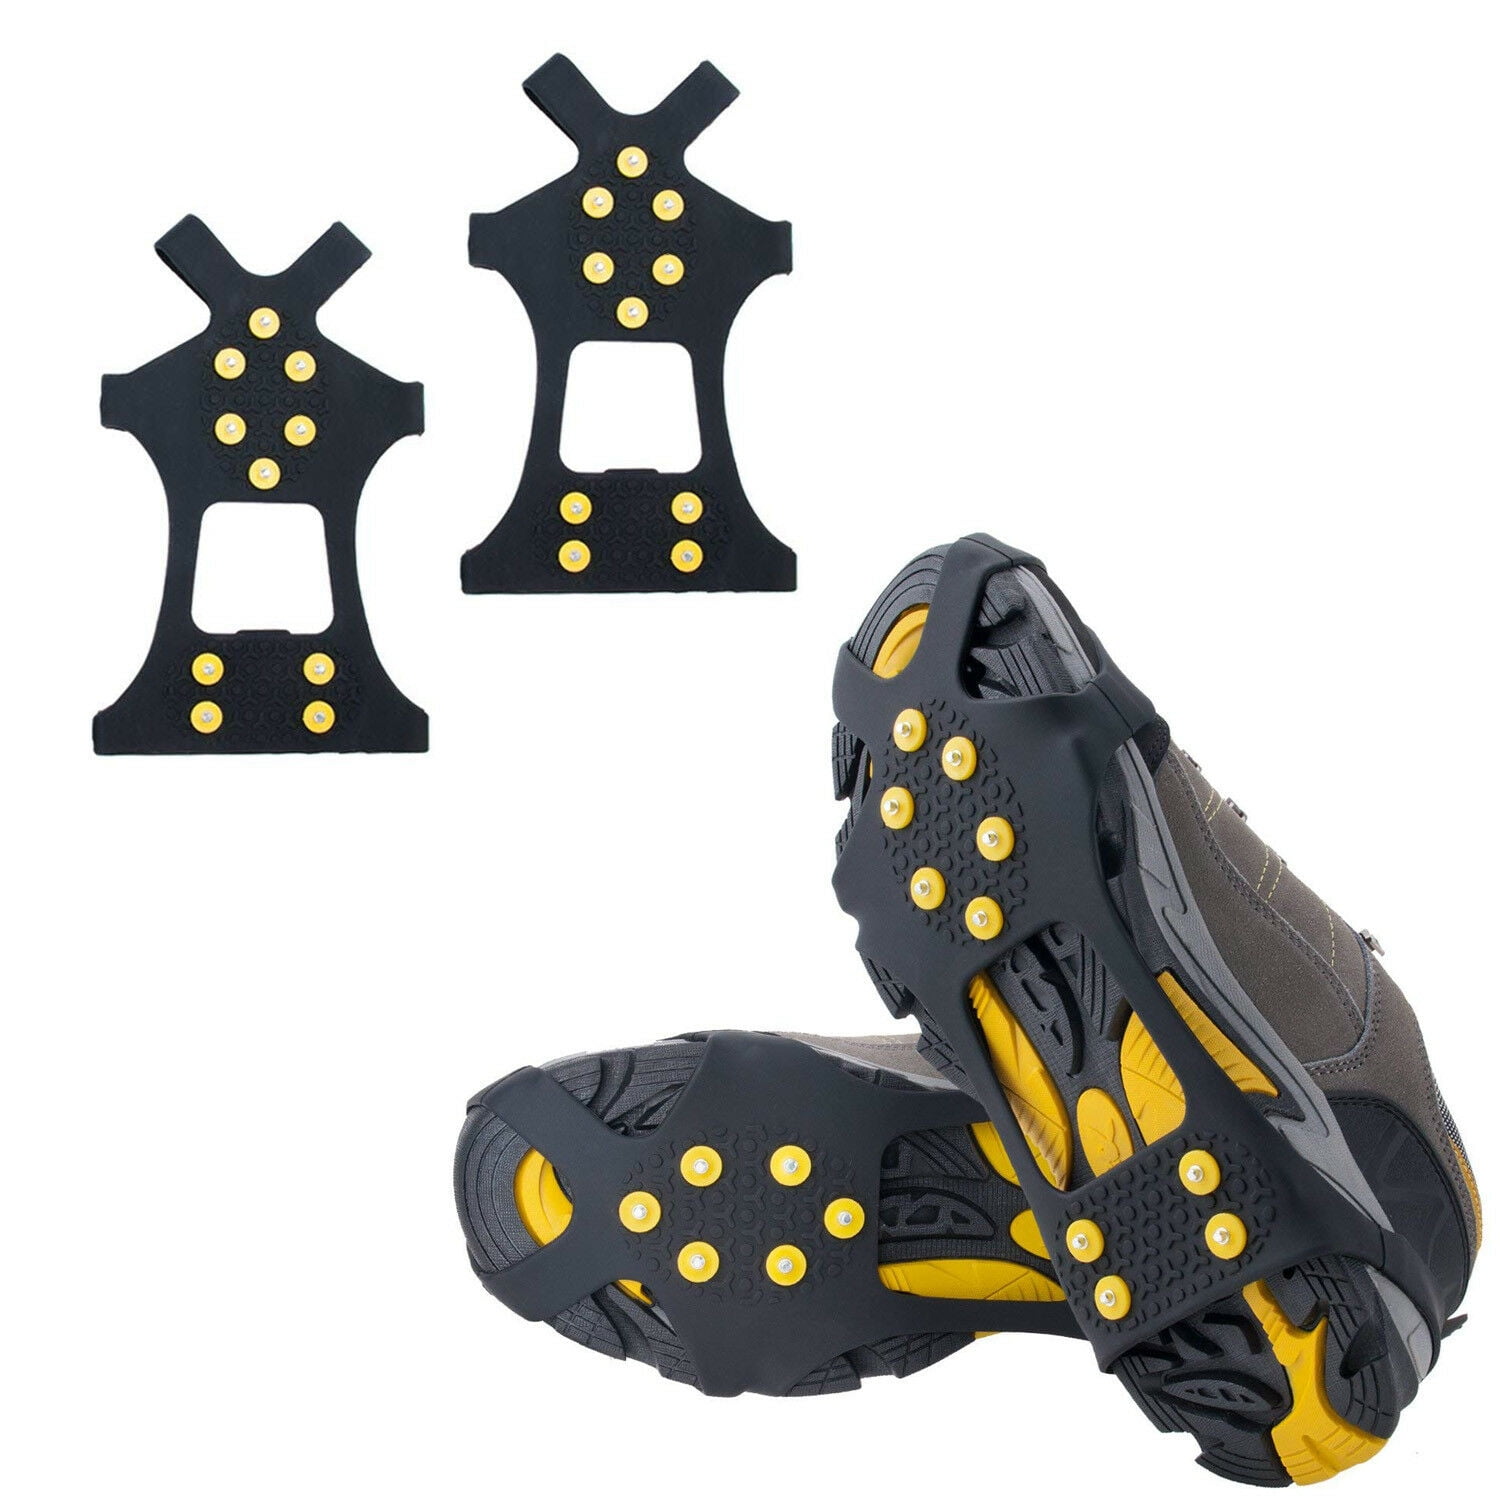 XL ICE GRIPPERS Anti Non Slip Snow Safety Studs Cleats Crampons Overshoe Covers 